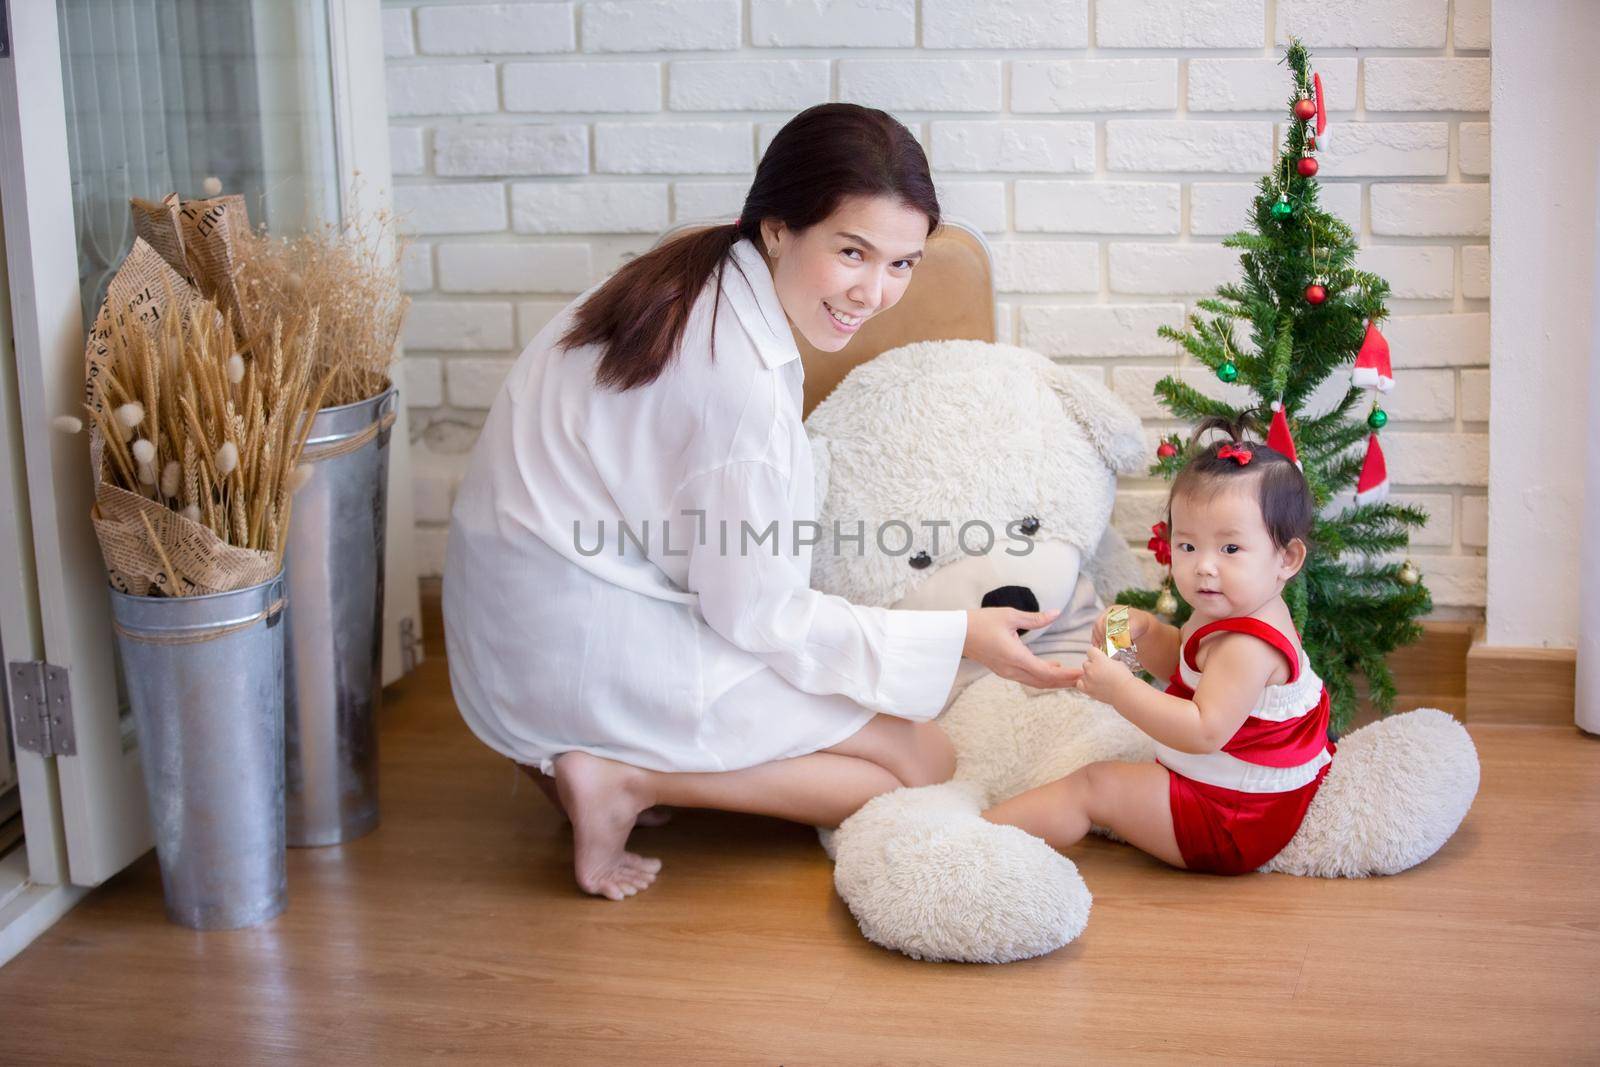 Full Length Of Cute Baby Girl Wearing Santa Costume While Sitting With Christmas Decorations by chuanchai